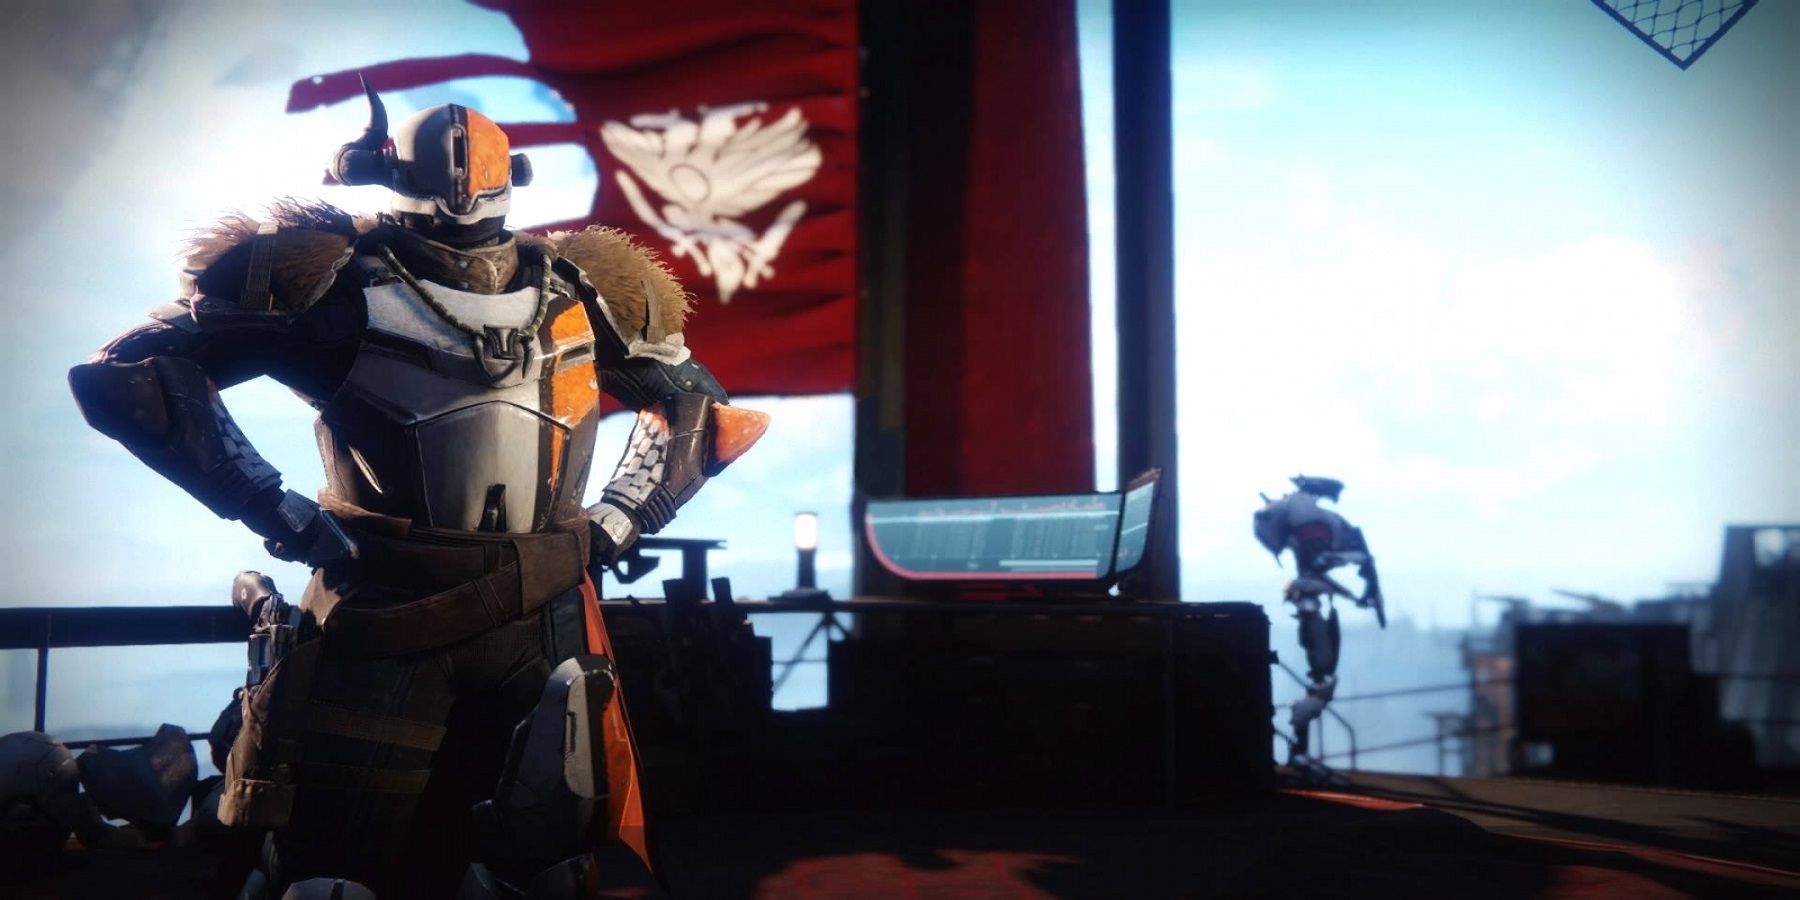 A new post from Bungie outlines multiple changes coming to Destiny 2's Crucible, from nodes to matchmaking.